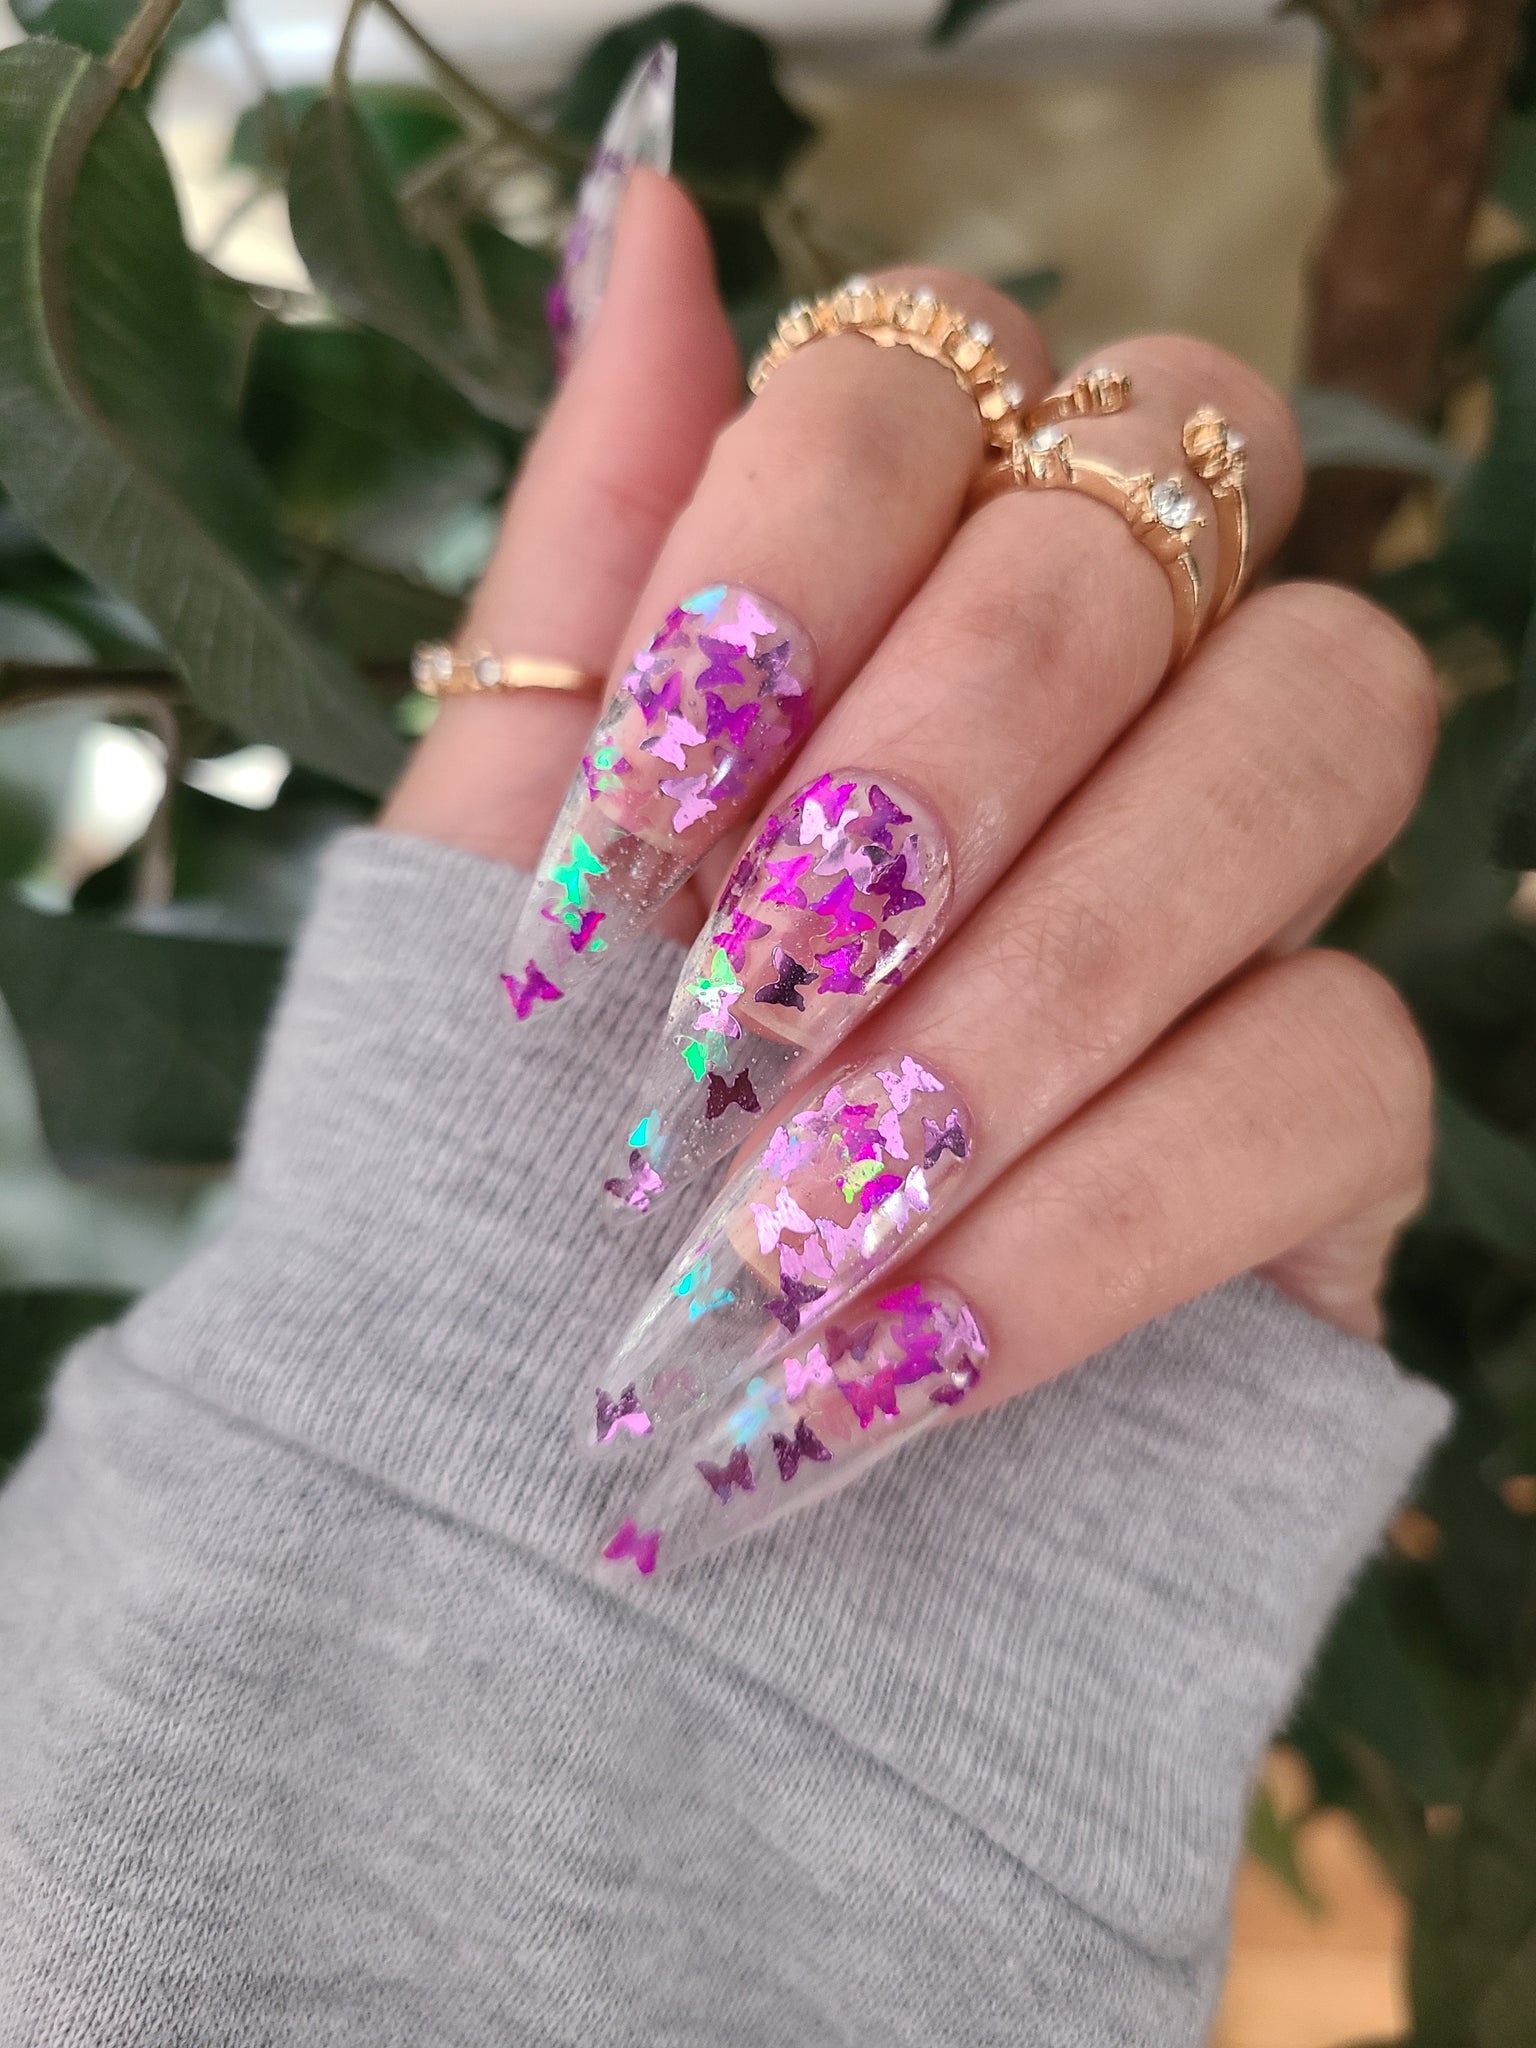 Stained Glass Nail Art Designs for Your Next Manicure | Makeup.com